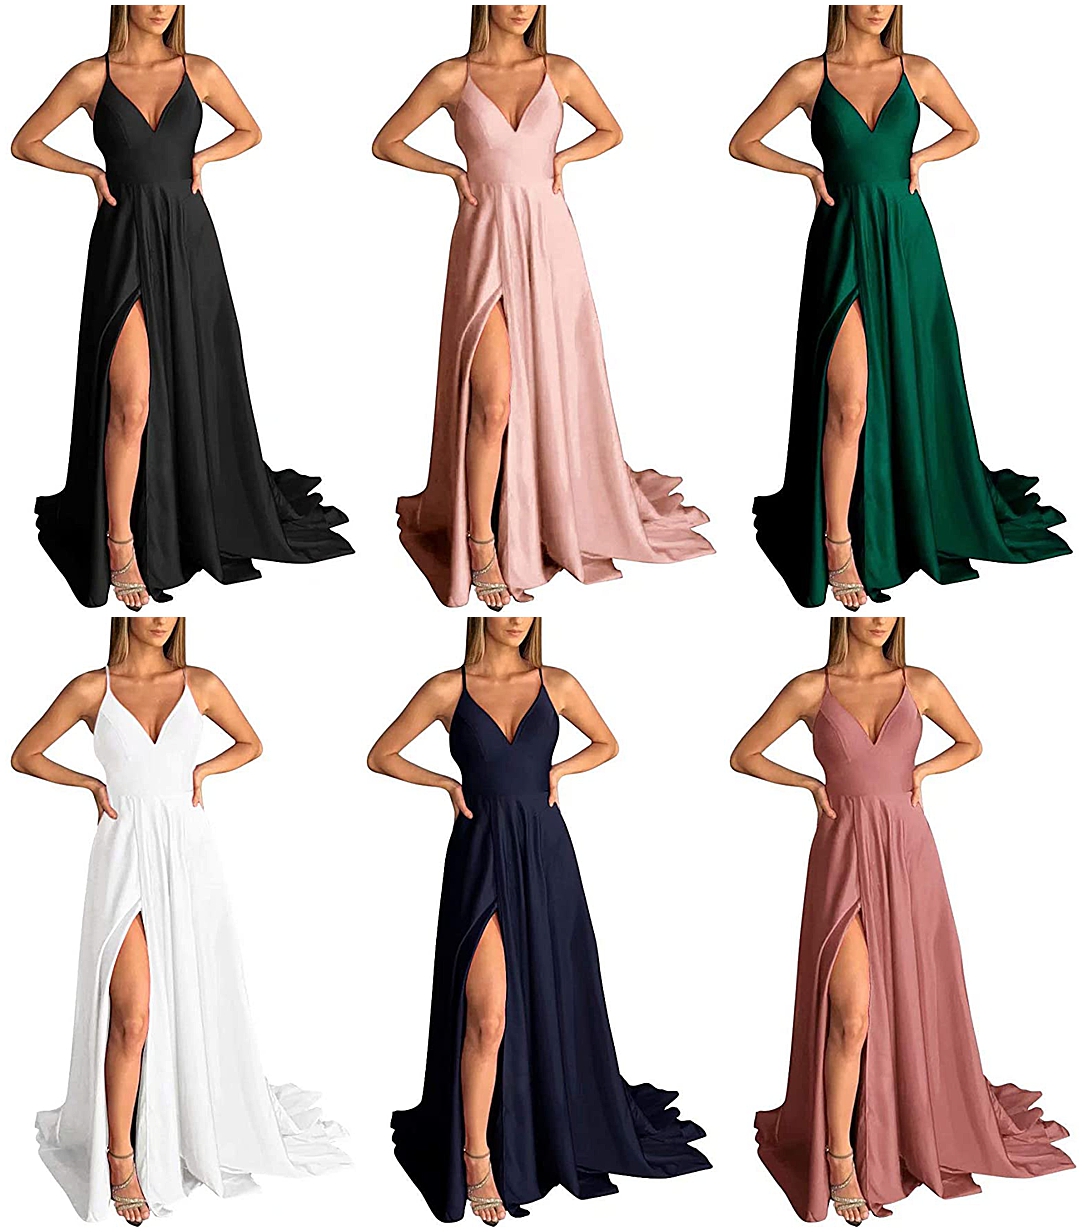 Engagement Session Dresses from Amazon plus tips and tricks on What to wear for your session 0004